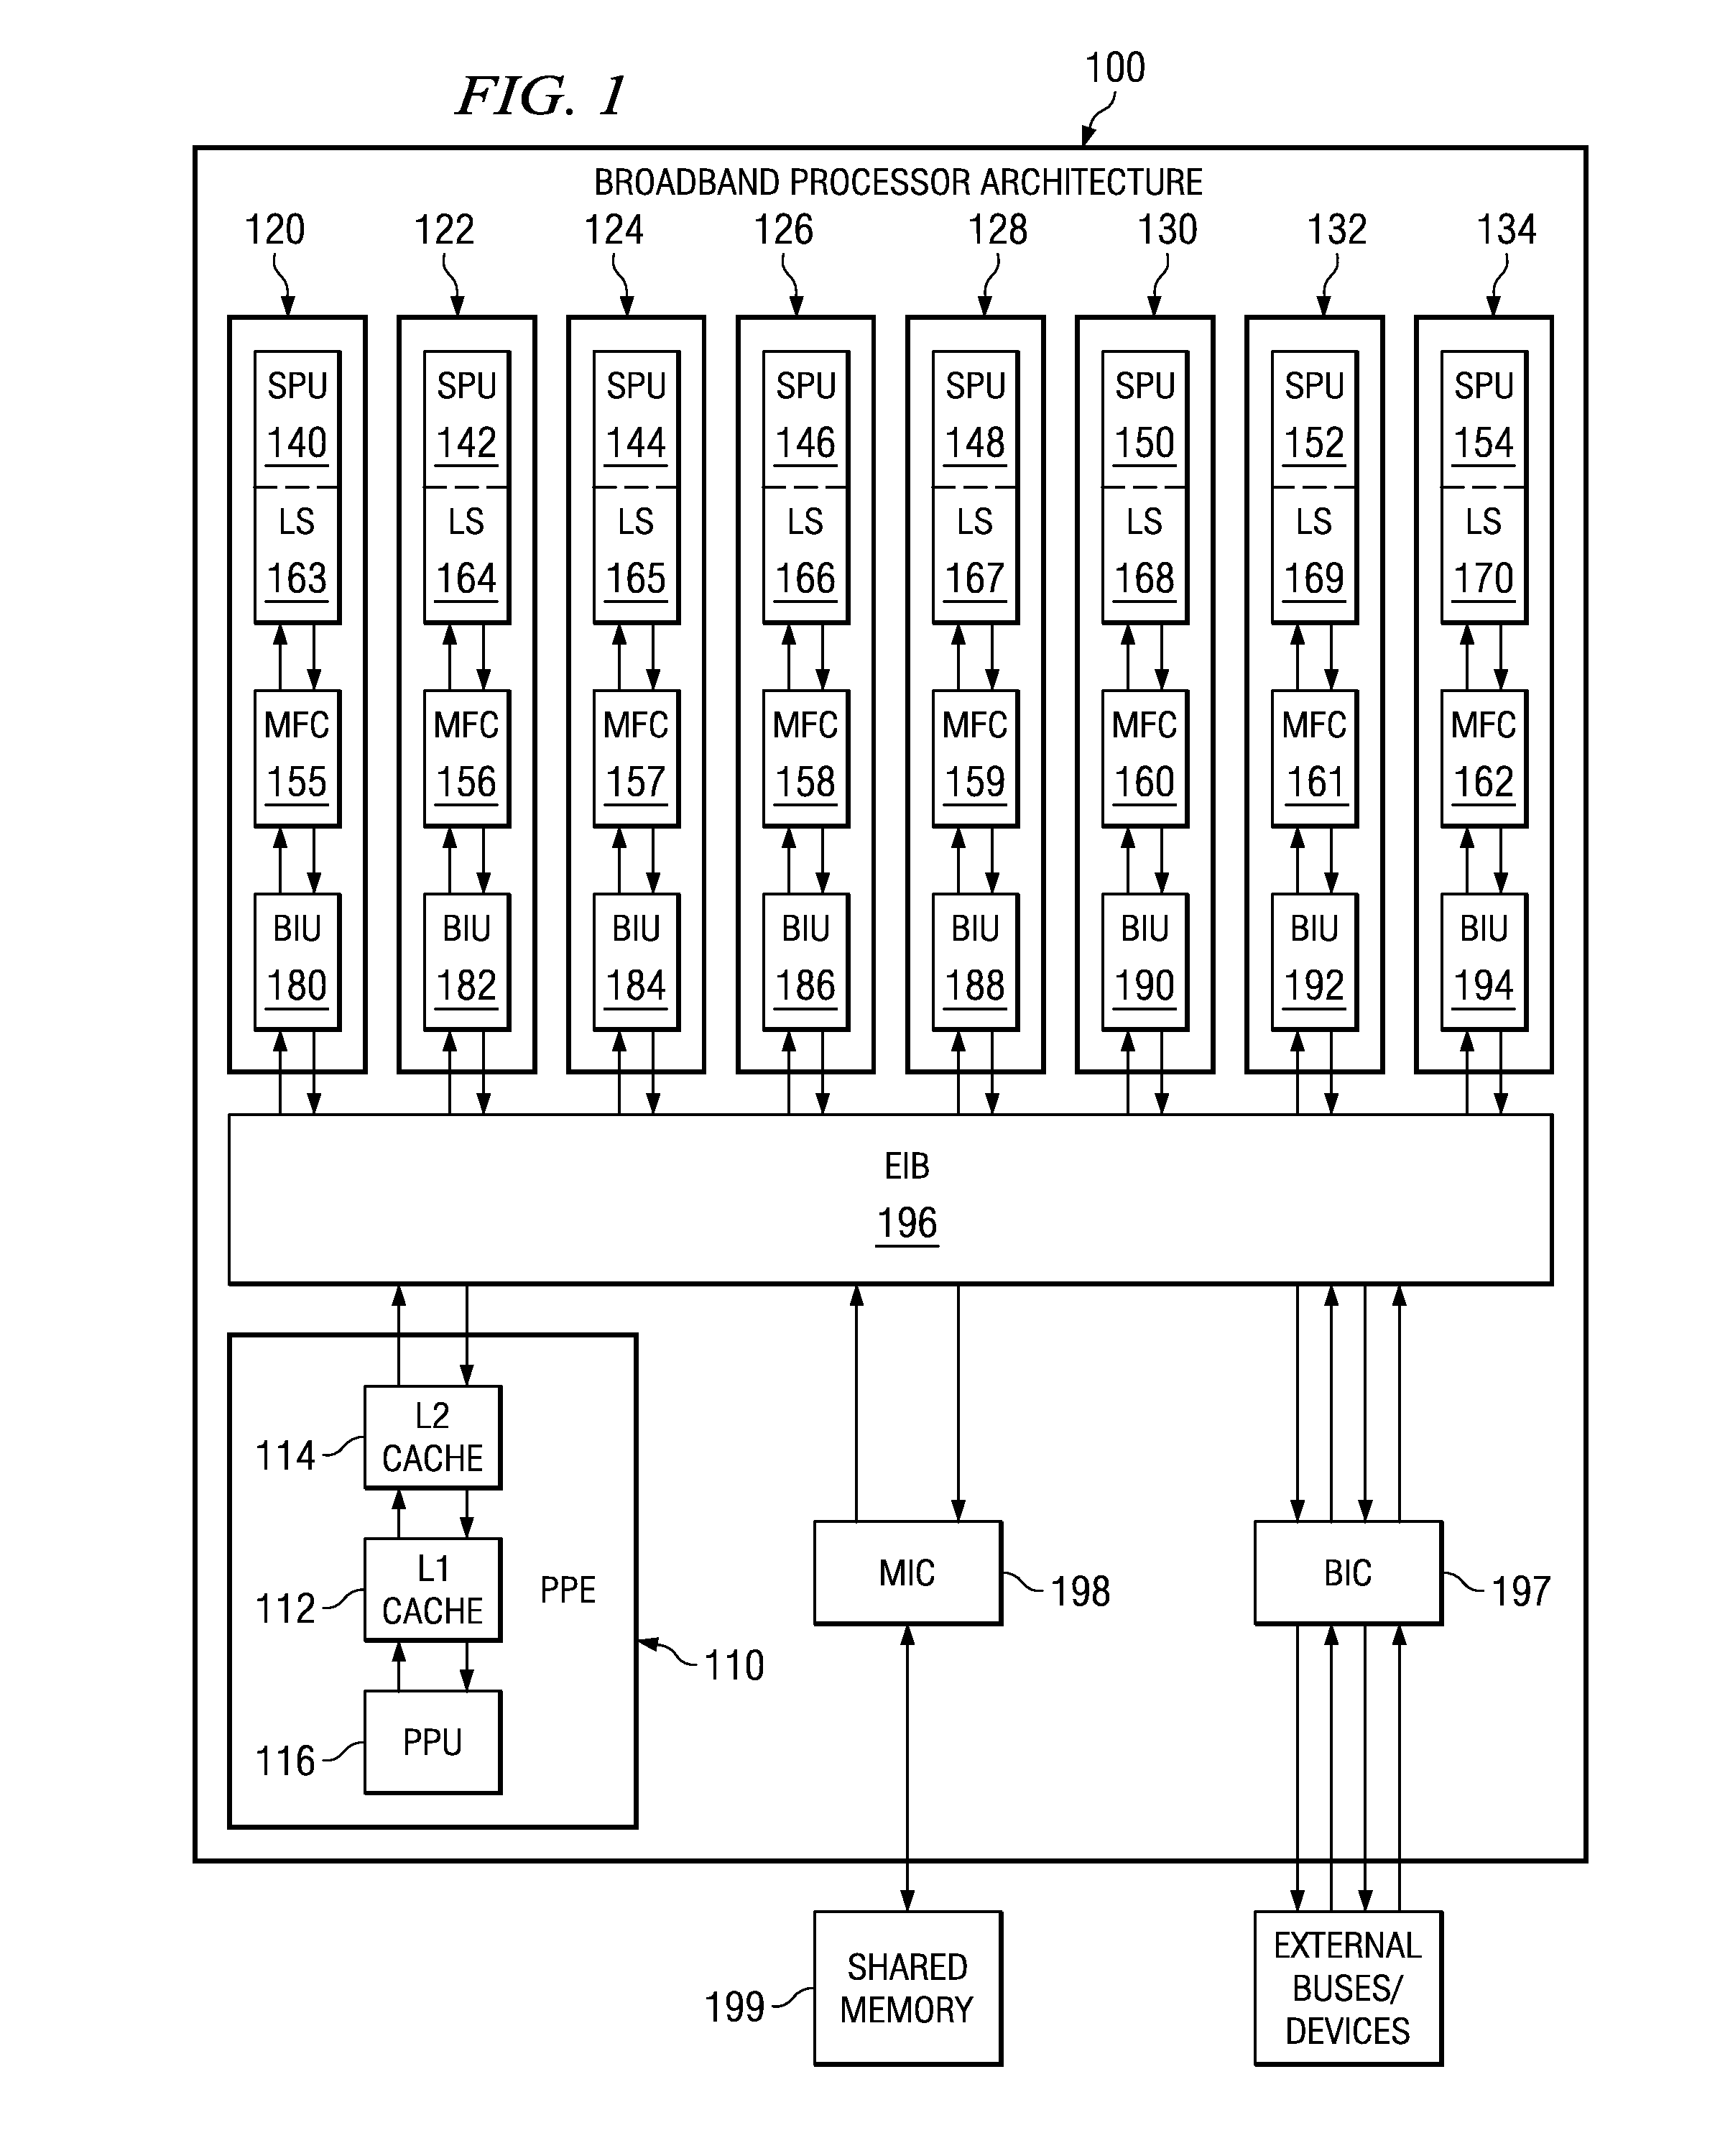 Compiler implemented software cache apparatus and method in which non-aliased explicitly fetched data are excluded